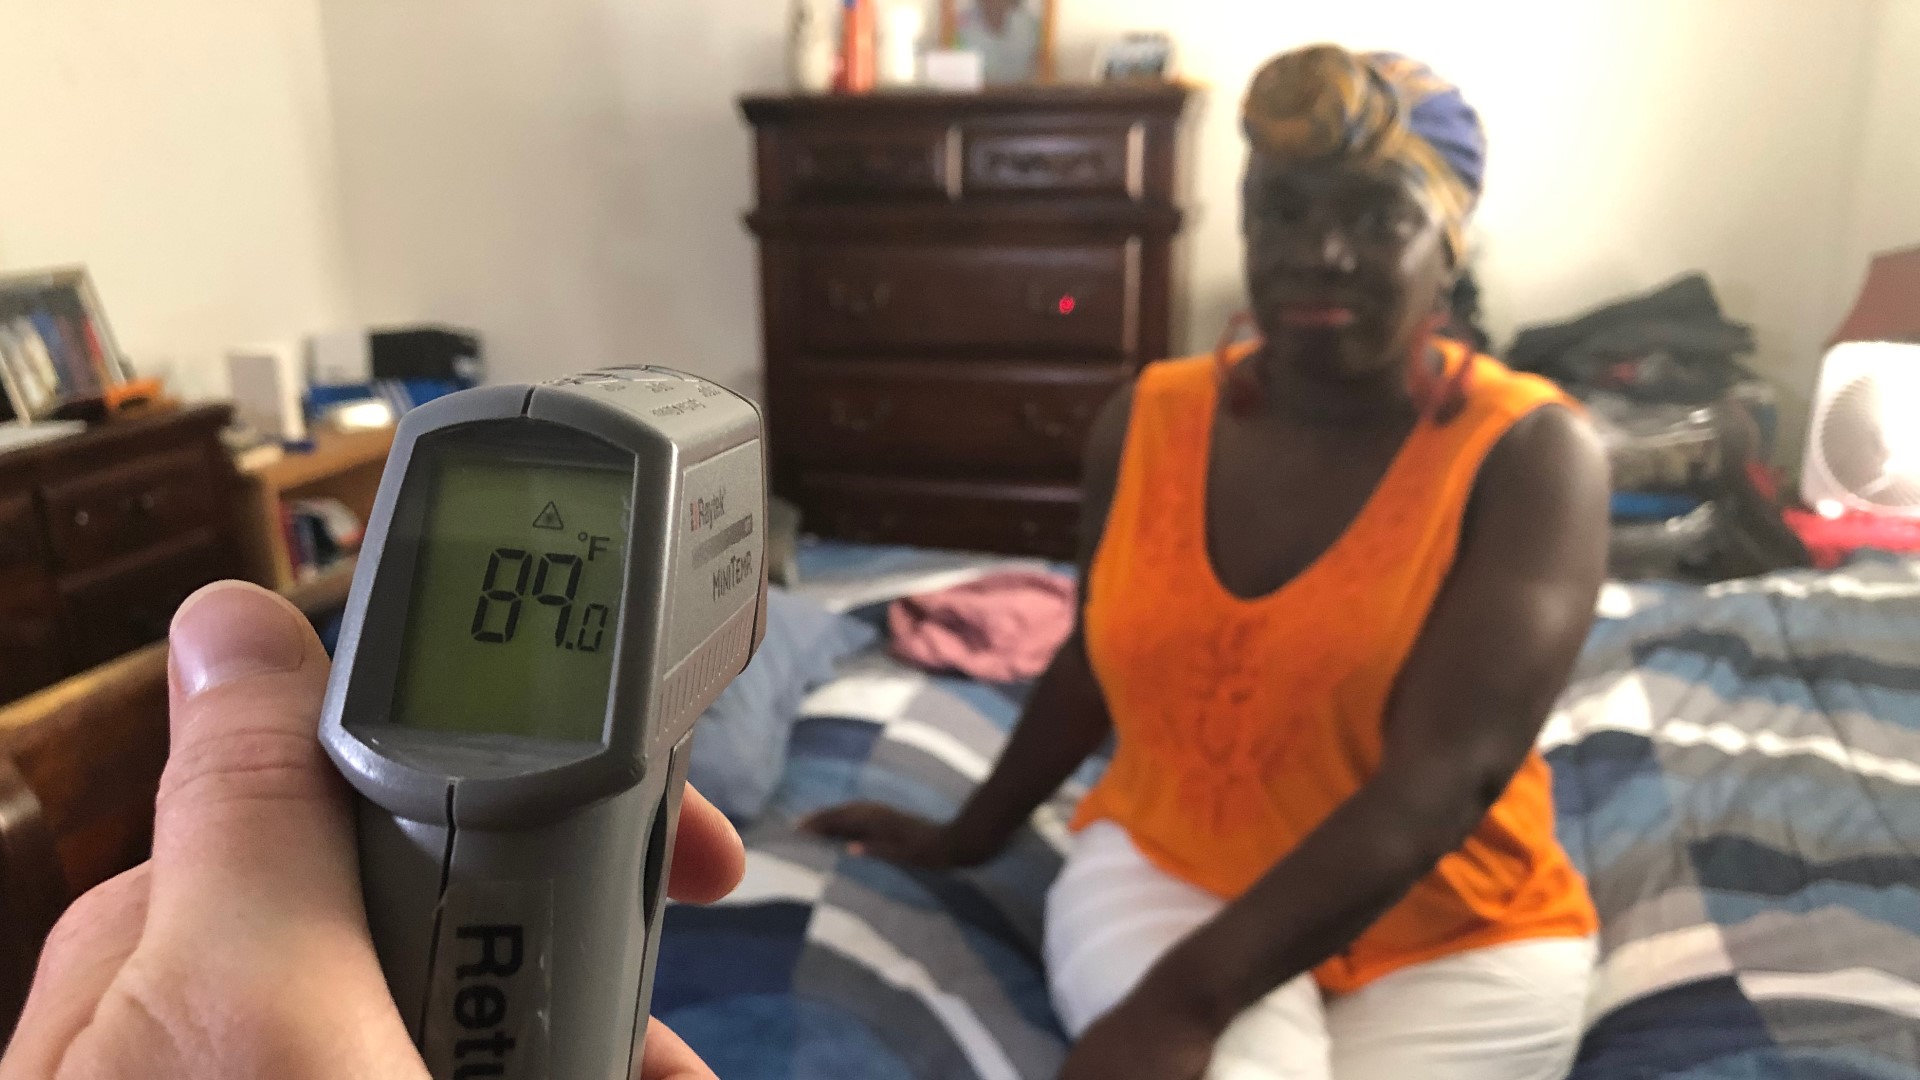 The heat has been brutal in the DMV this weekend.
That storm will give us a little break tomorrow --- but there are a lot of renters who have been struggling to get by without A/C. Turns out--they could be stuck until laws change.